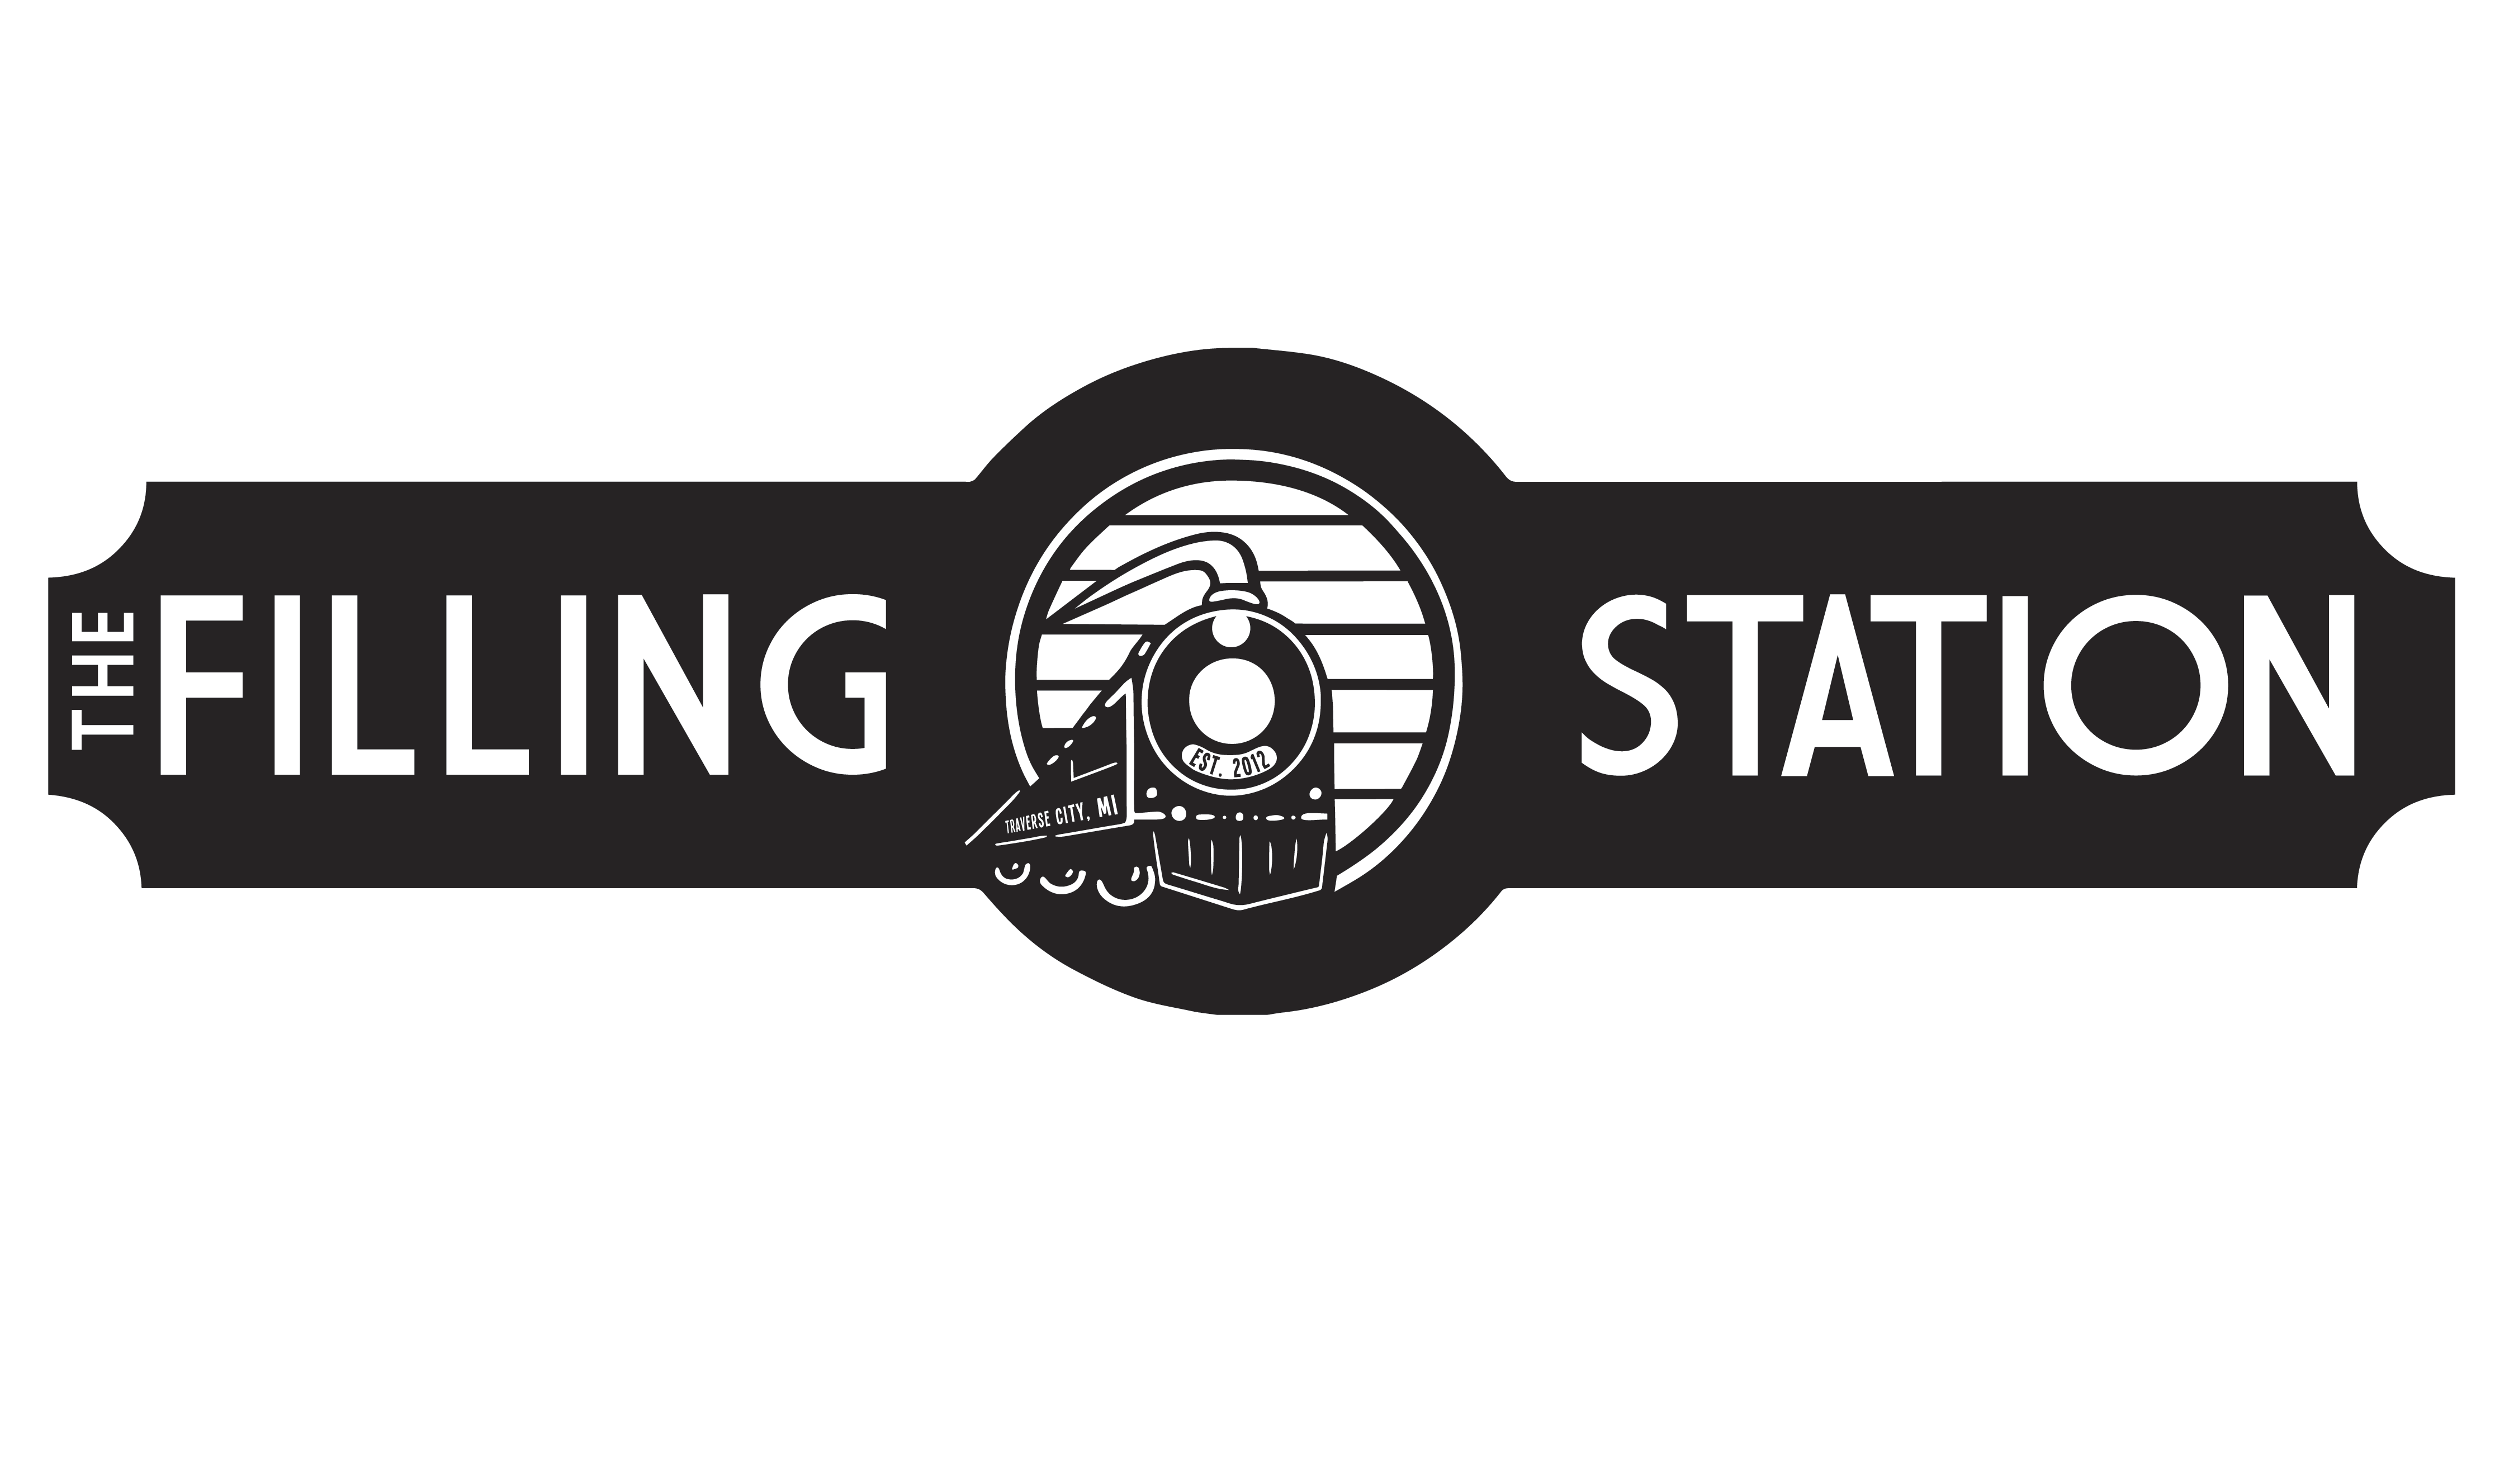 Microbrewery Logo - Home. The Filling Station Microbrewery